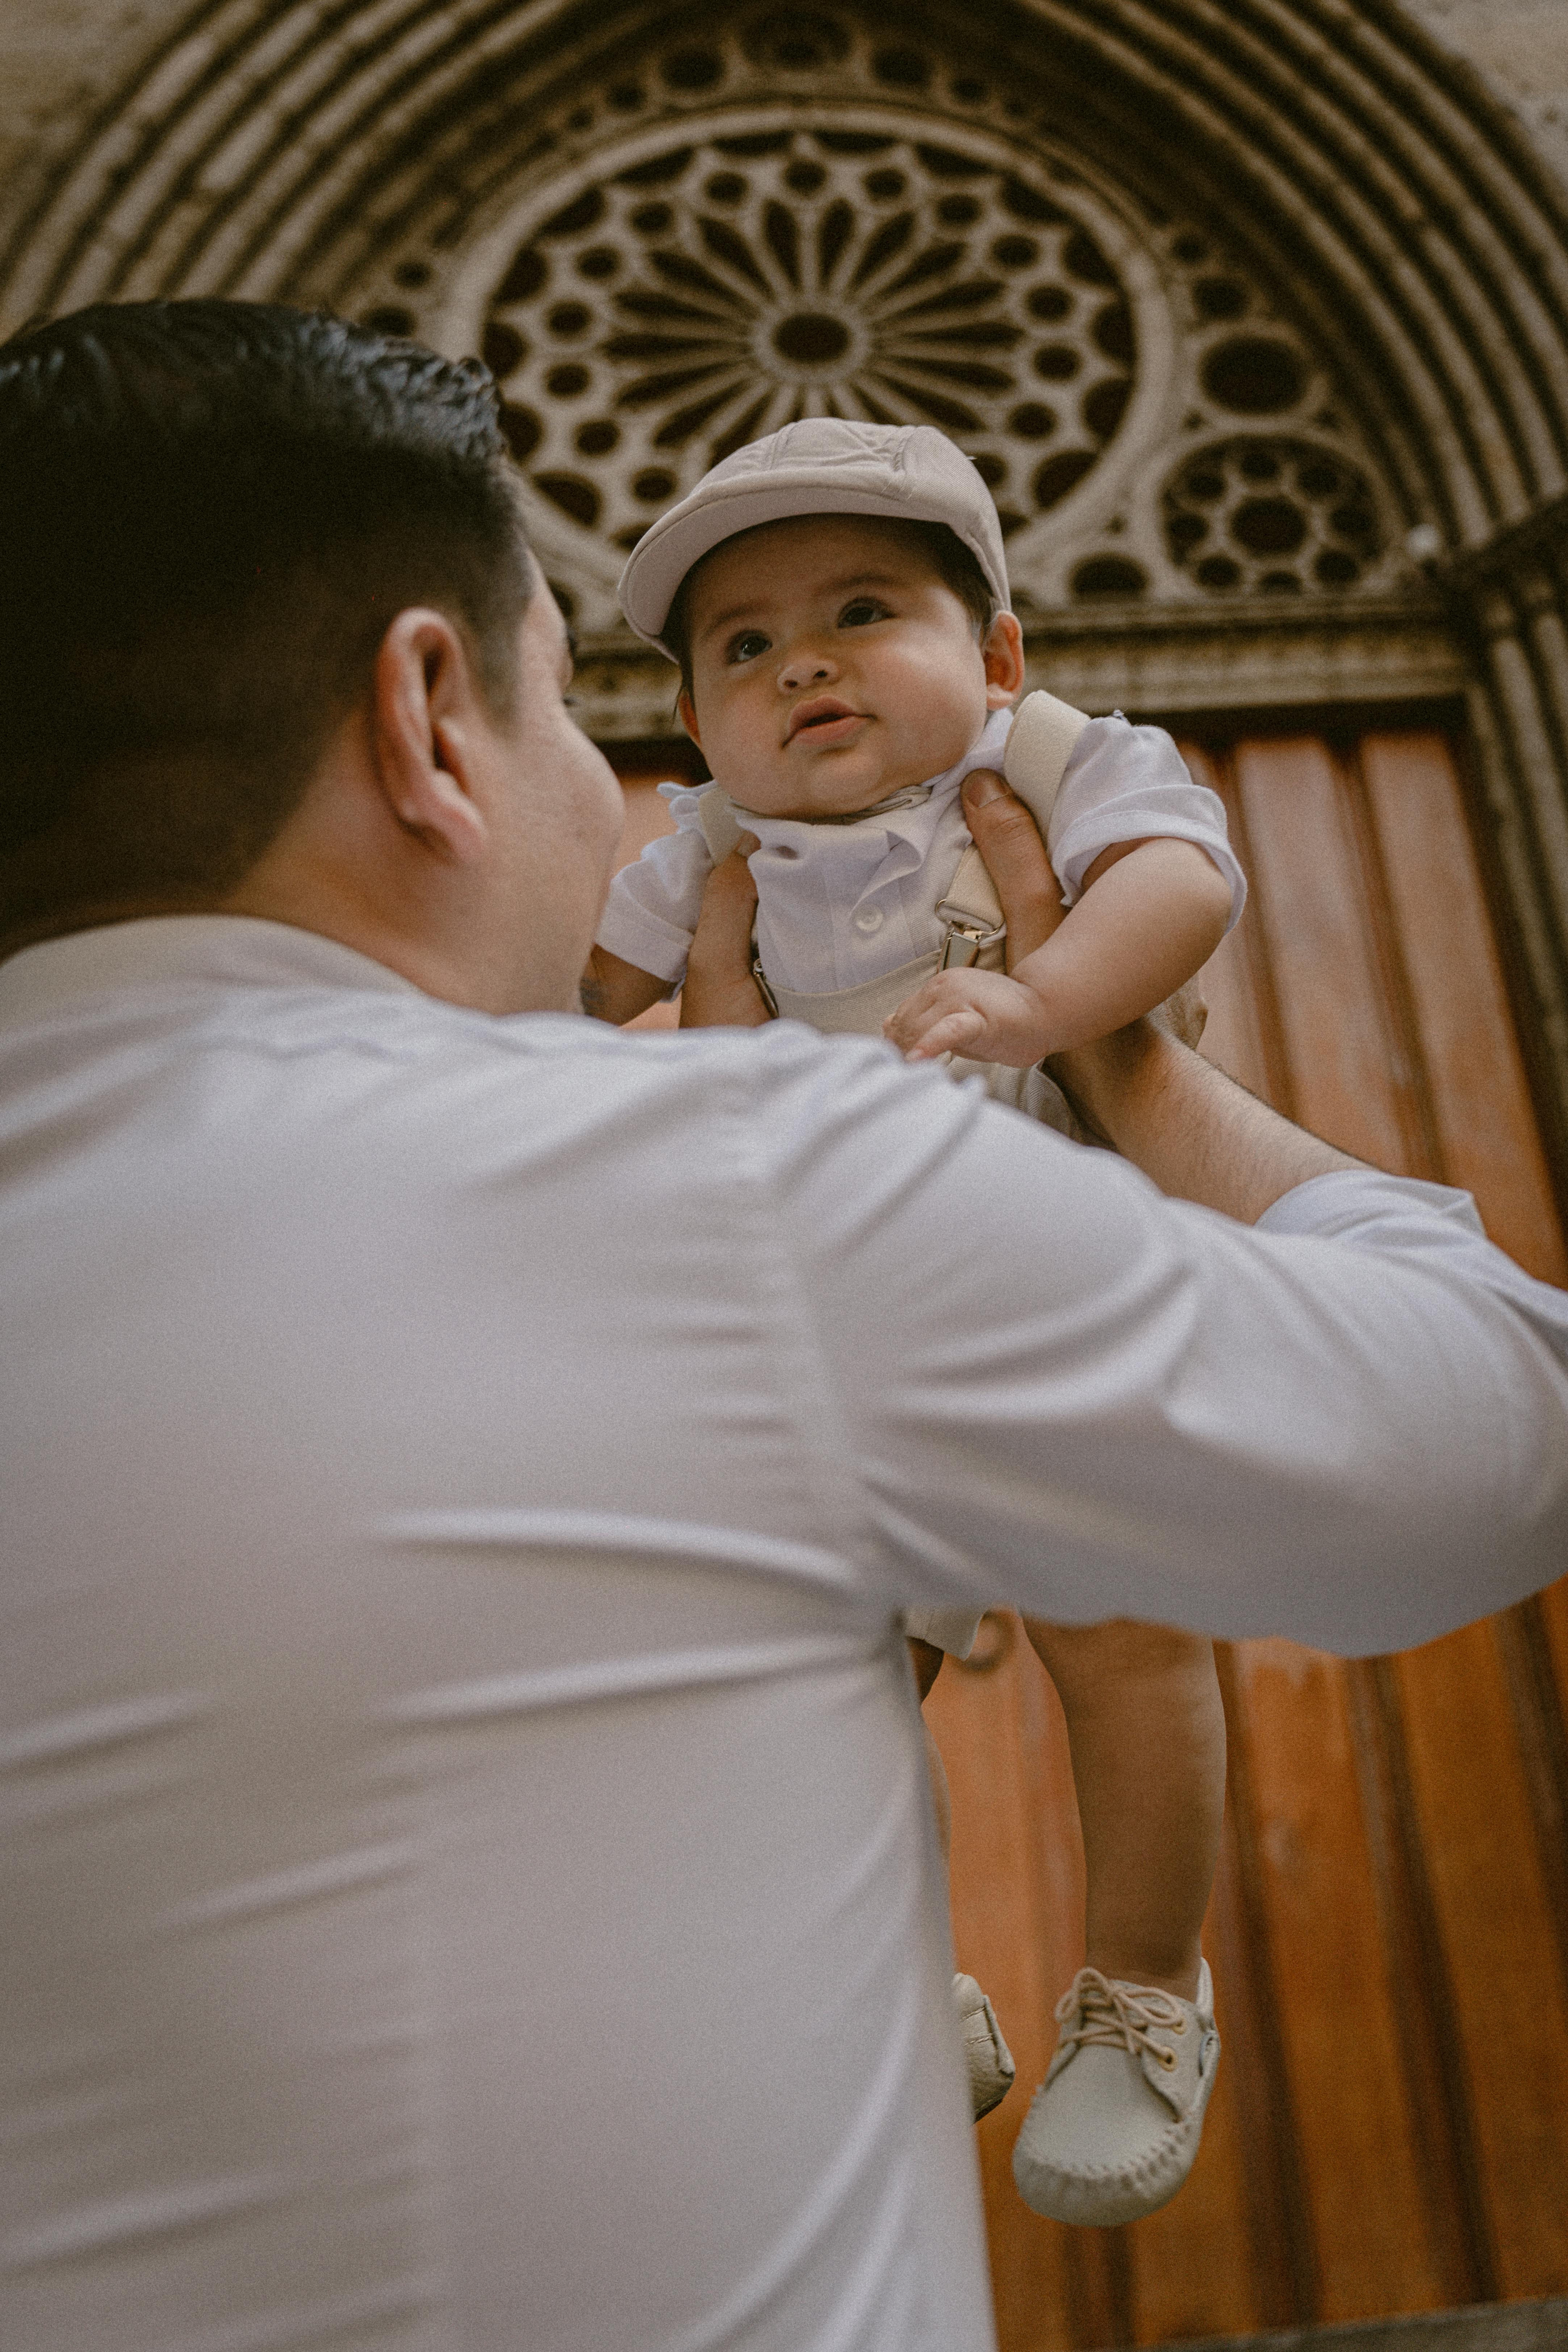 A man holding up a baby | Source: Pexels